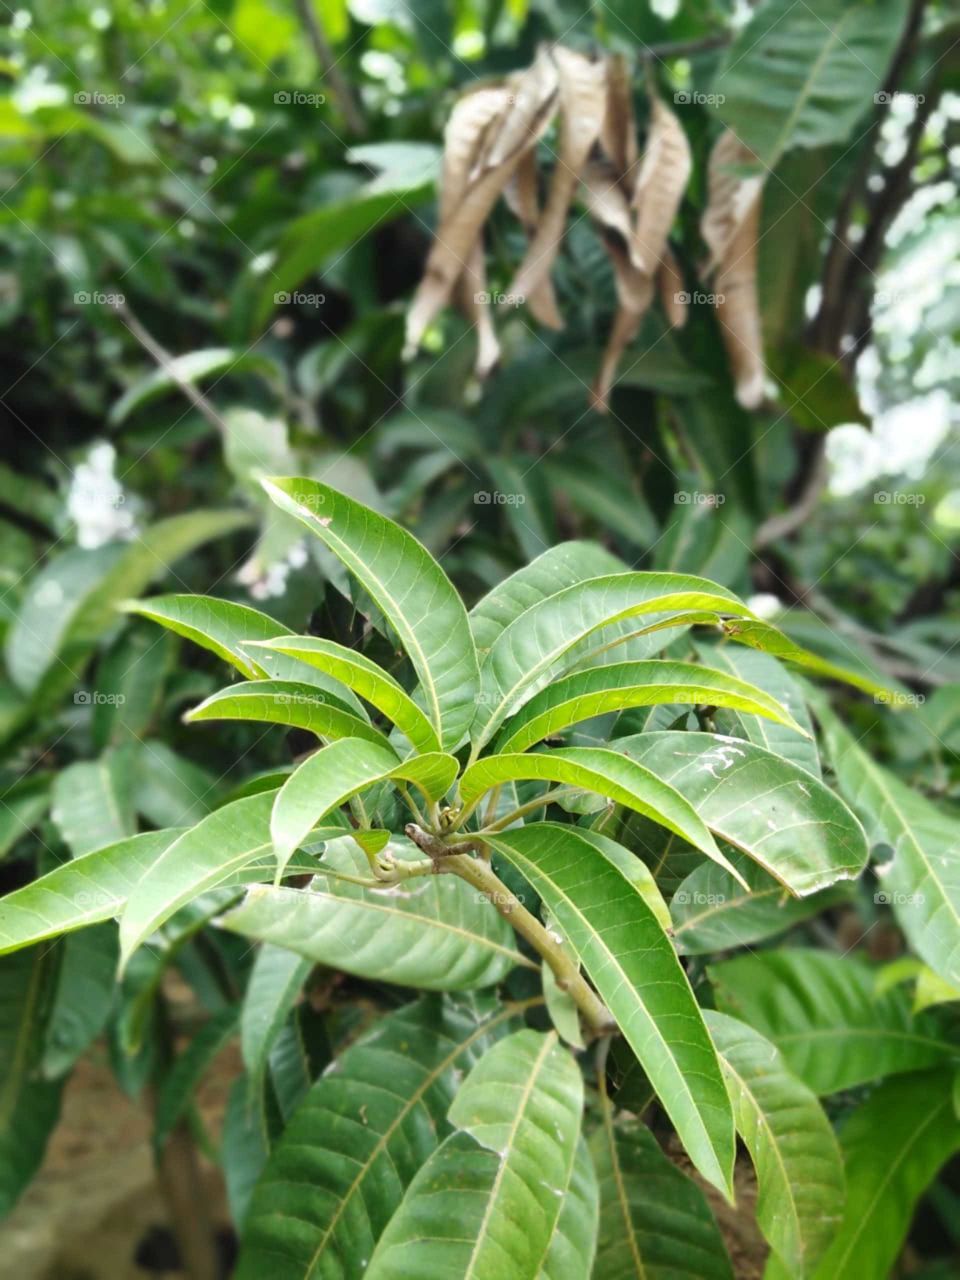 It is a beautiful and lovely mango leaf